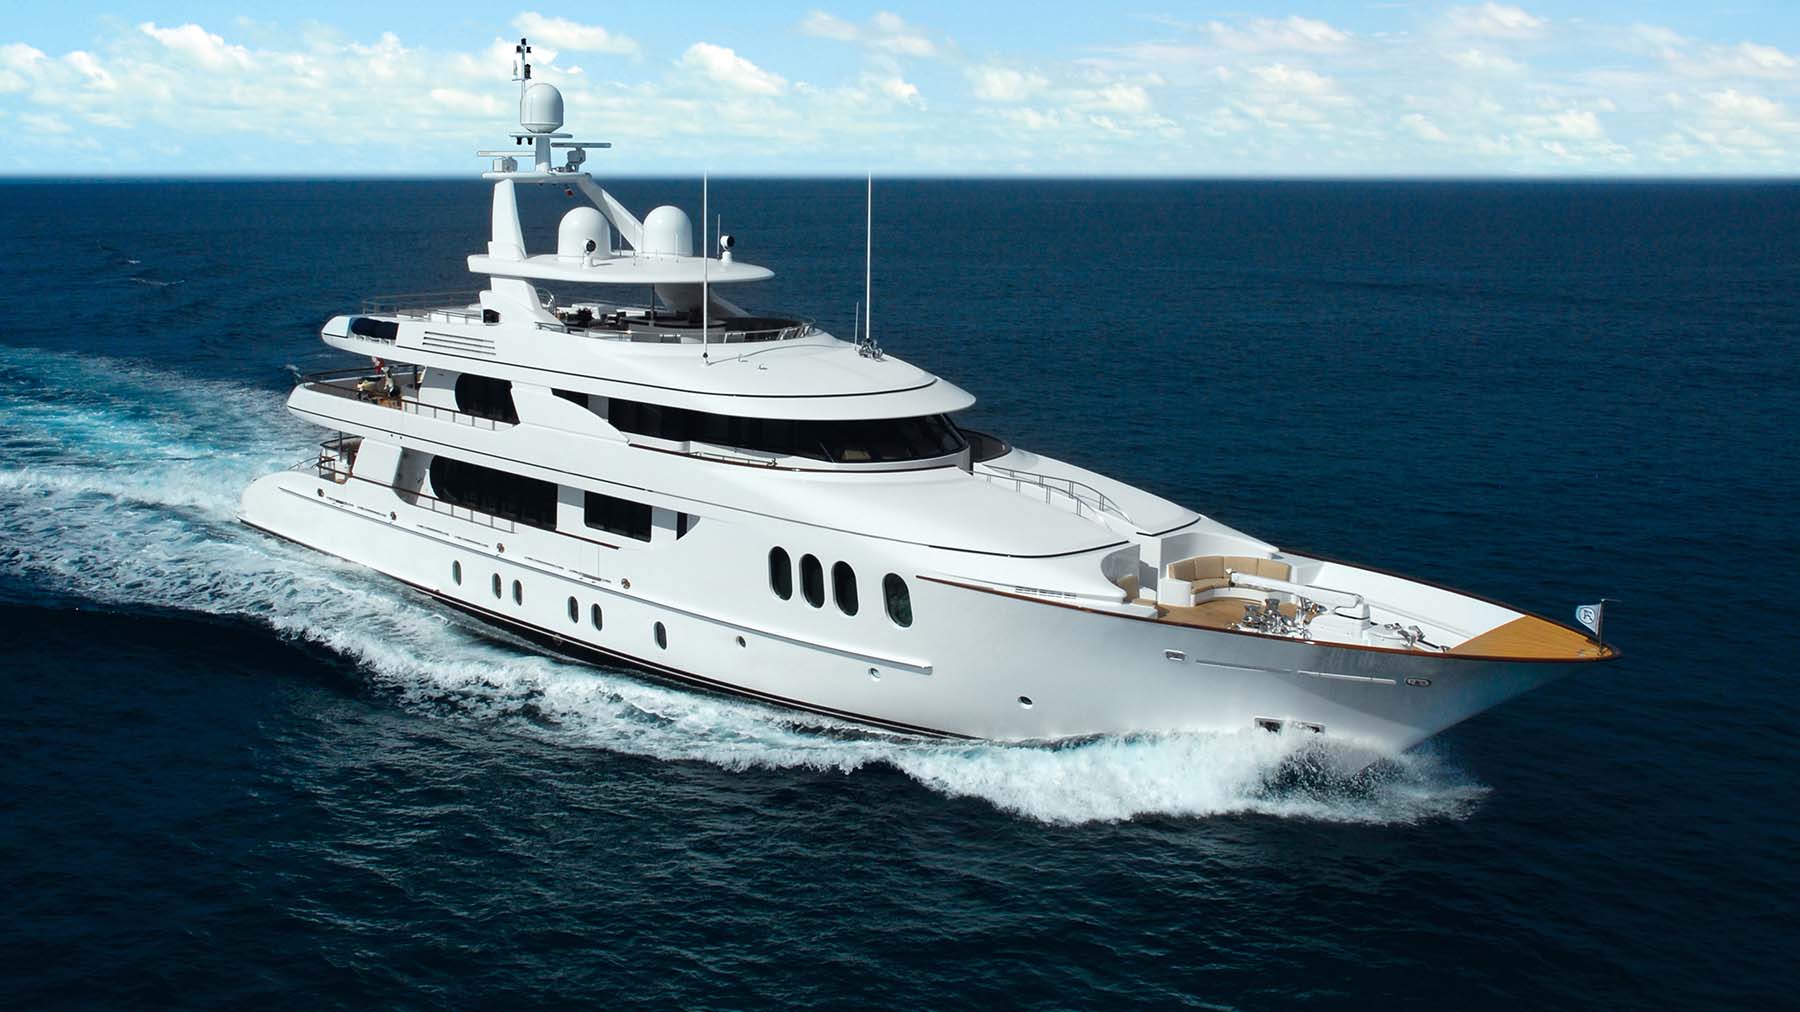 Amica-Mea-ex-Allegria-yacht-for-charter-002